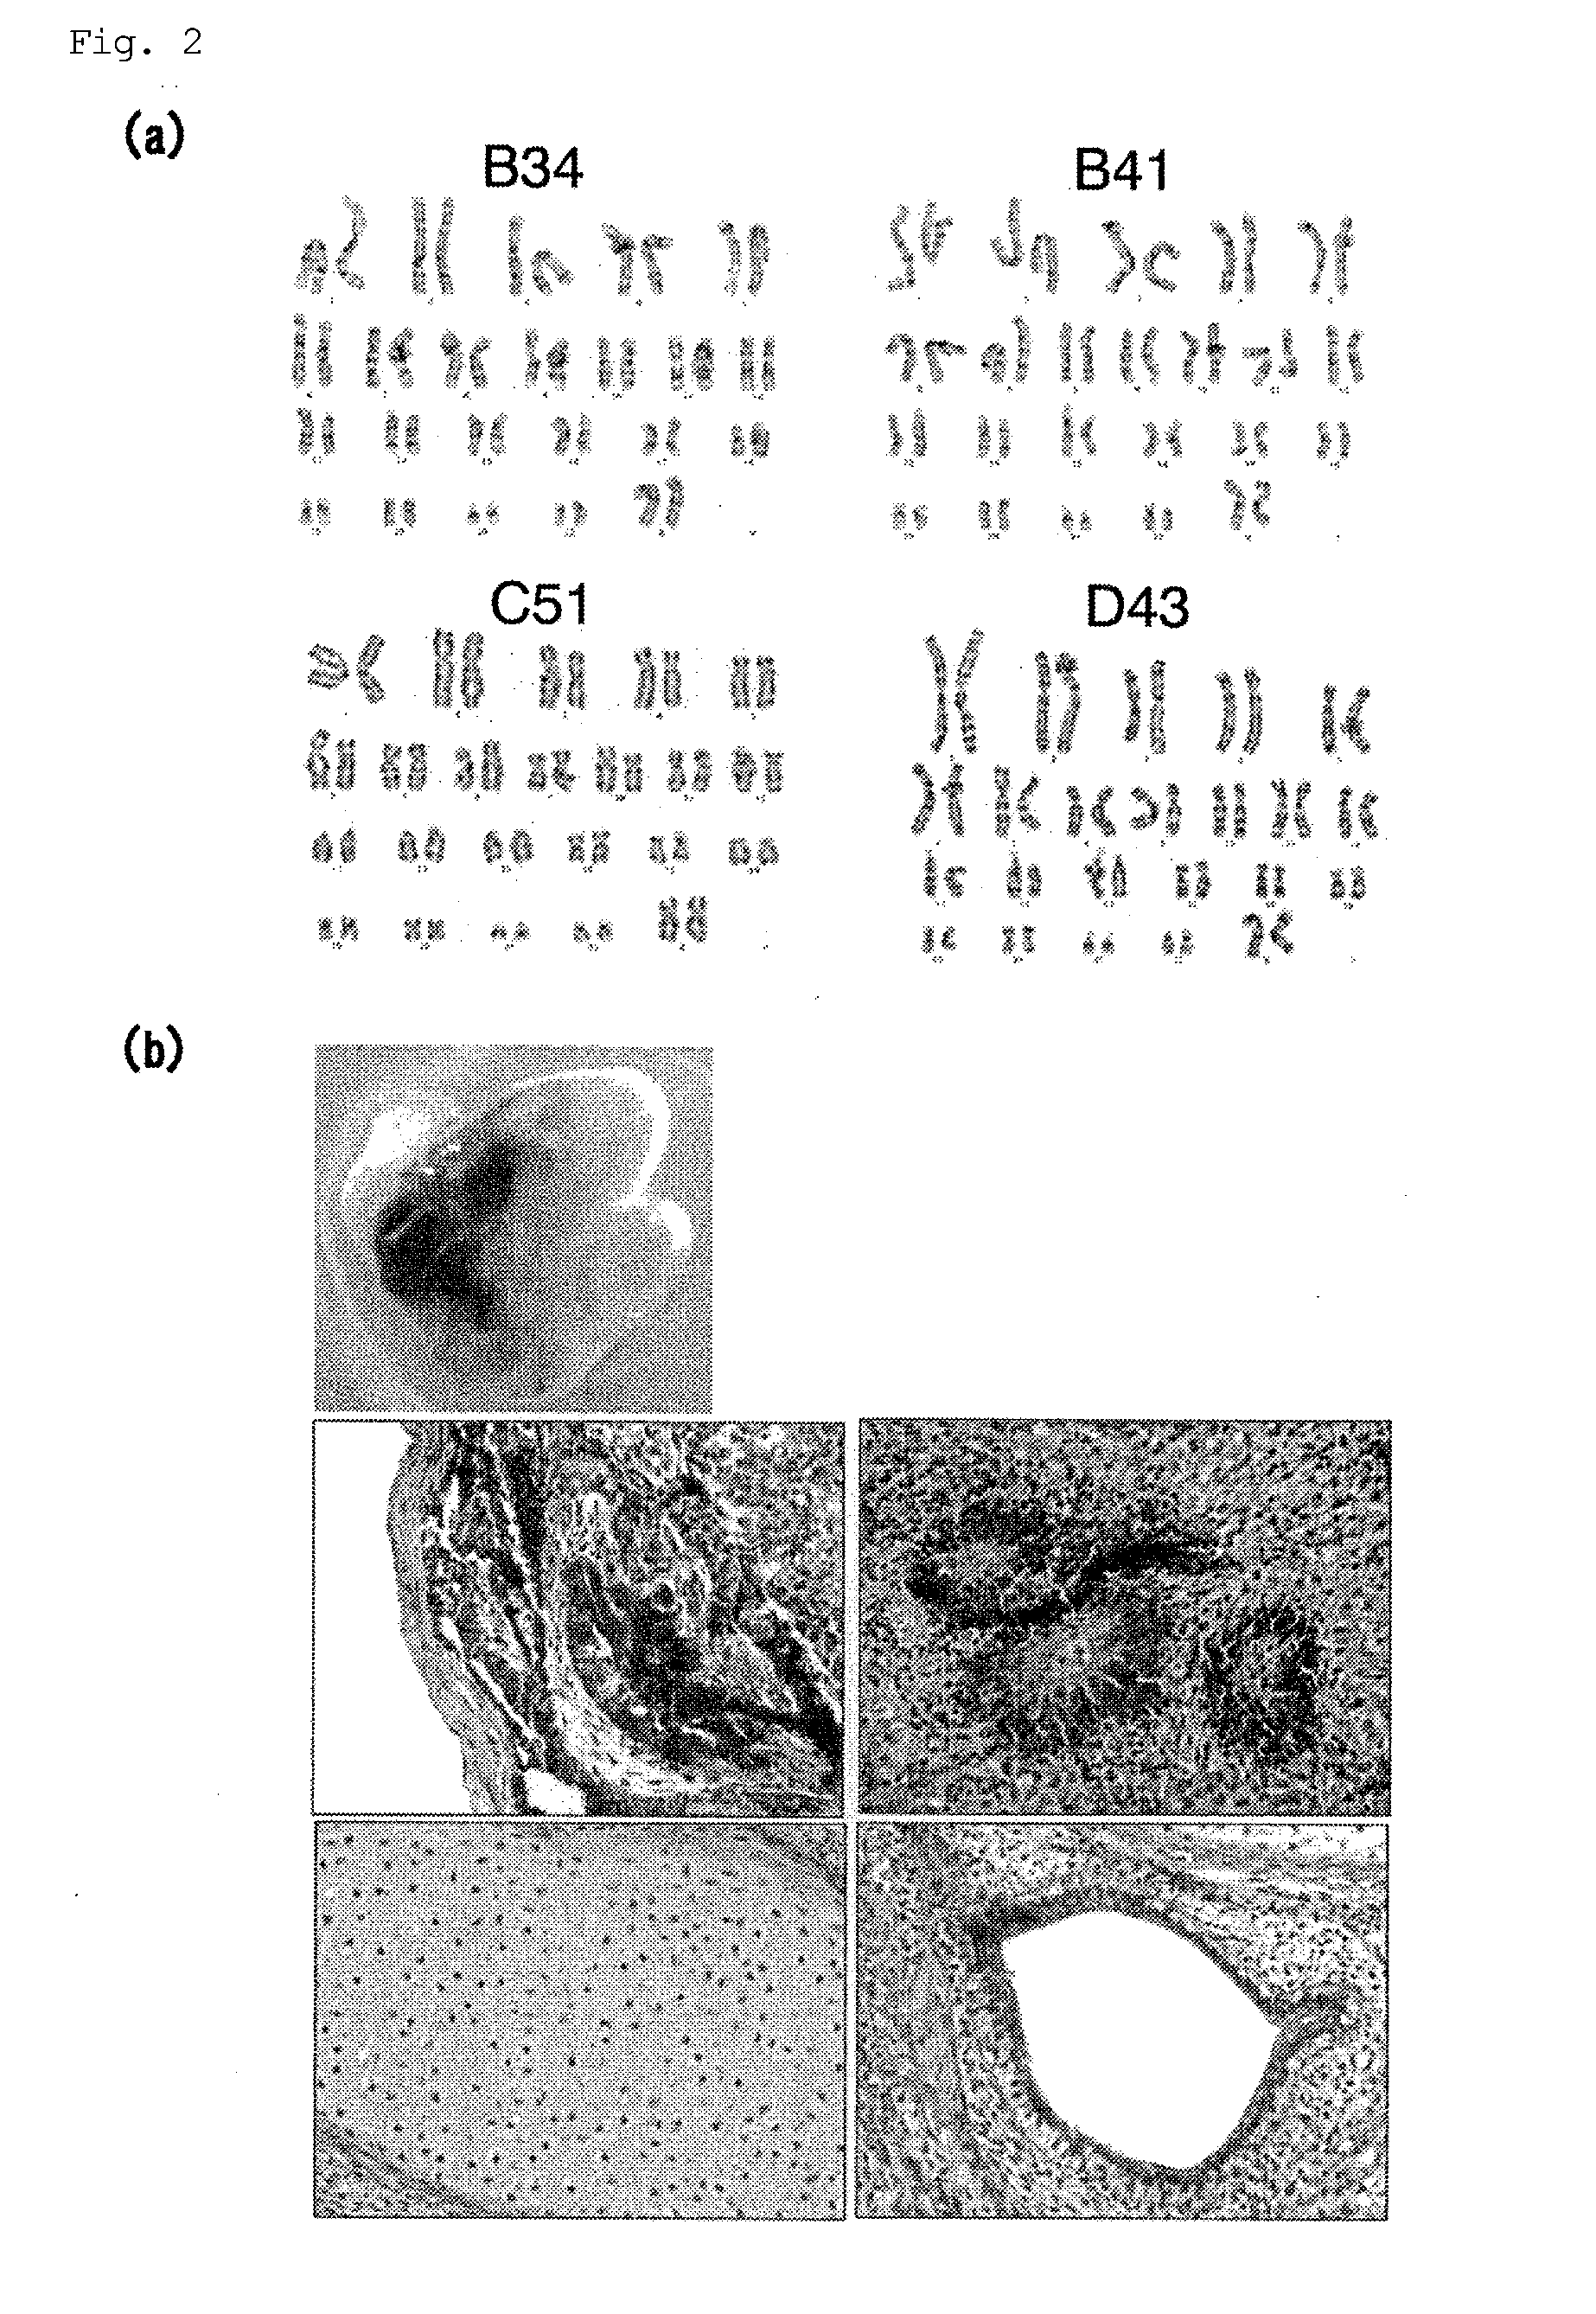 iPS CELL HAVING DIFFERENTIATION PROPENSITY FOR CORNEAL EPITHELIUM